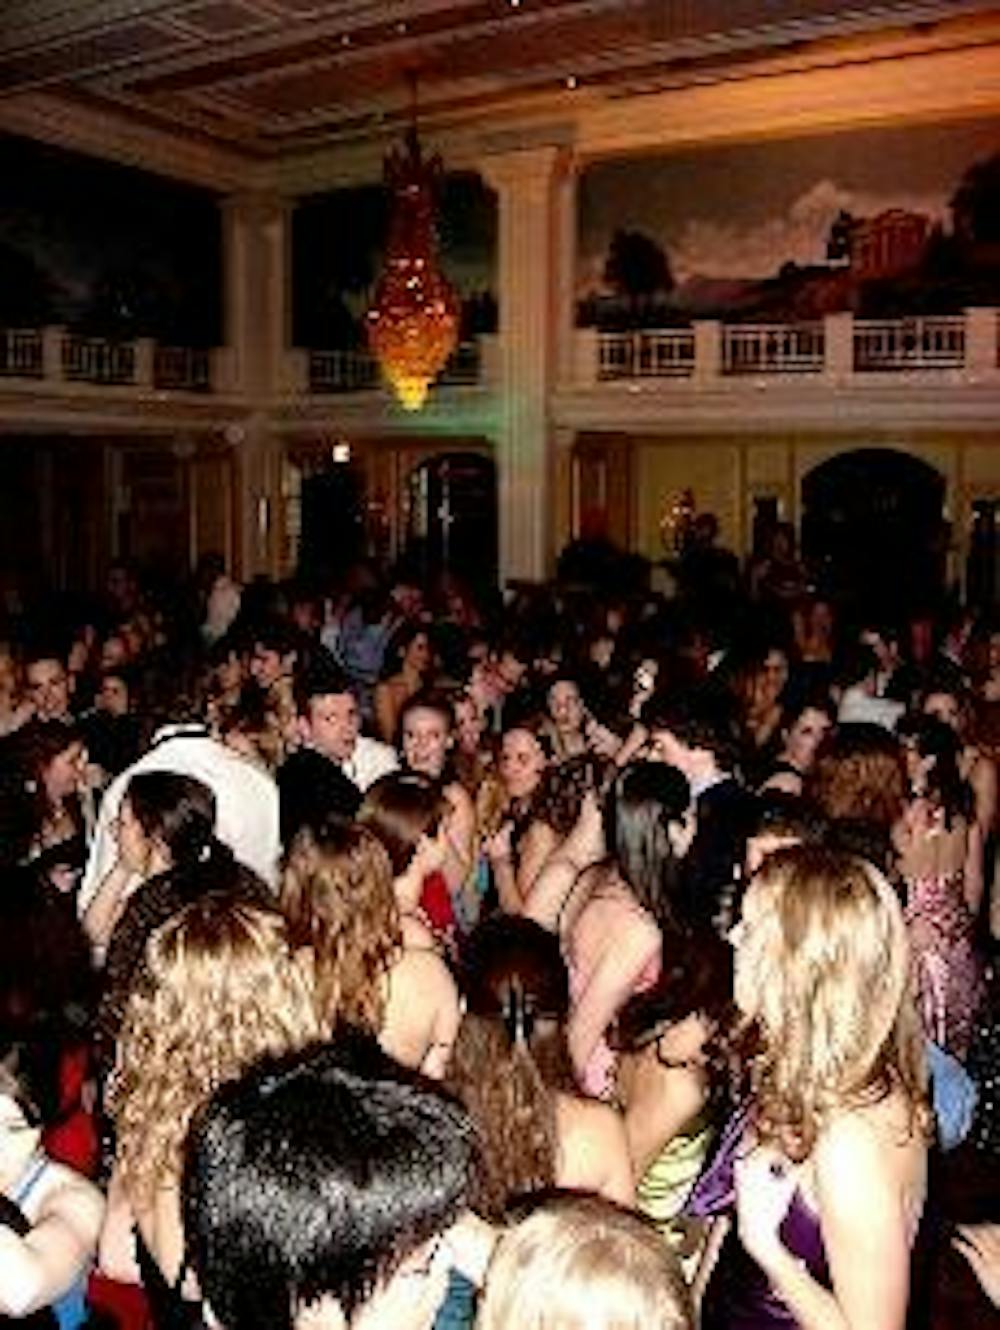 Students pack the dance floor at the sold out Founder's Day Ball Saturday night.